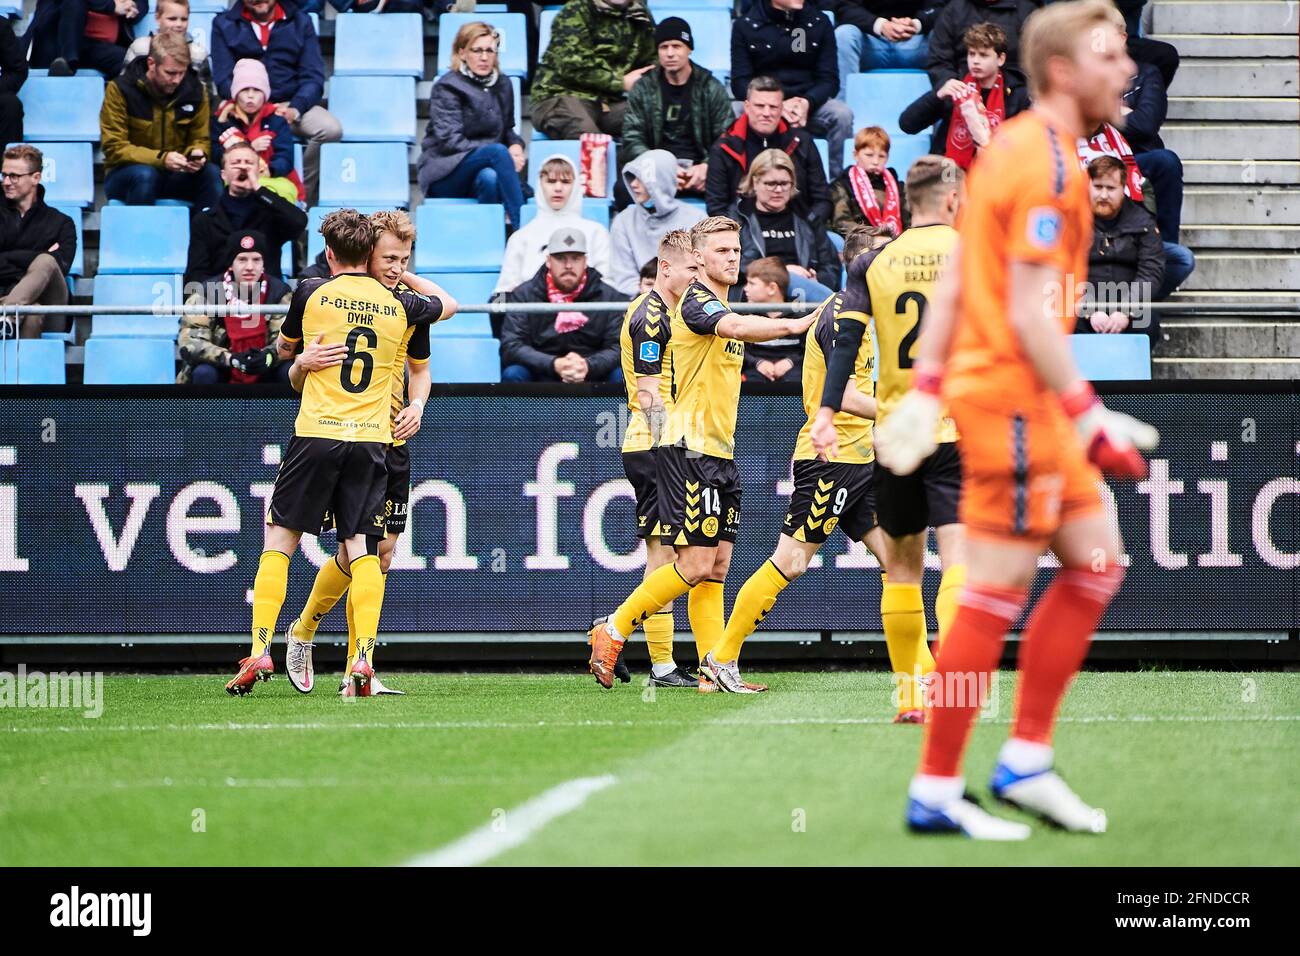 Aalborg, Denmark. 16th May, 2021. Casper Tengstedt (17) of AC Horsens  scores for 0-1 during the 3F Superliga match between Aalborg Boldklub and AC  Horsens at Aalborg Portland Park in Aalborg. (Photo